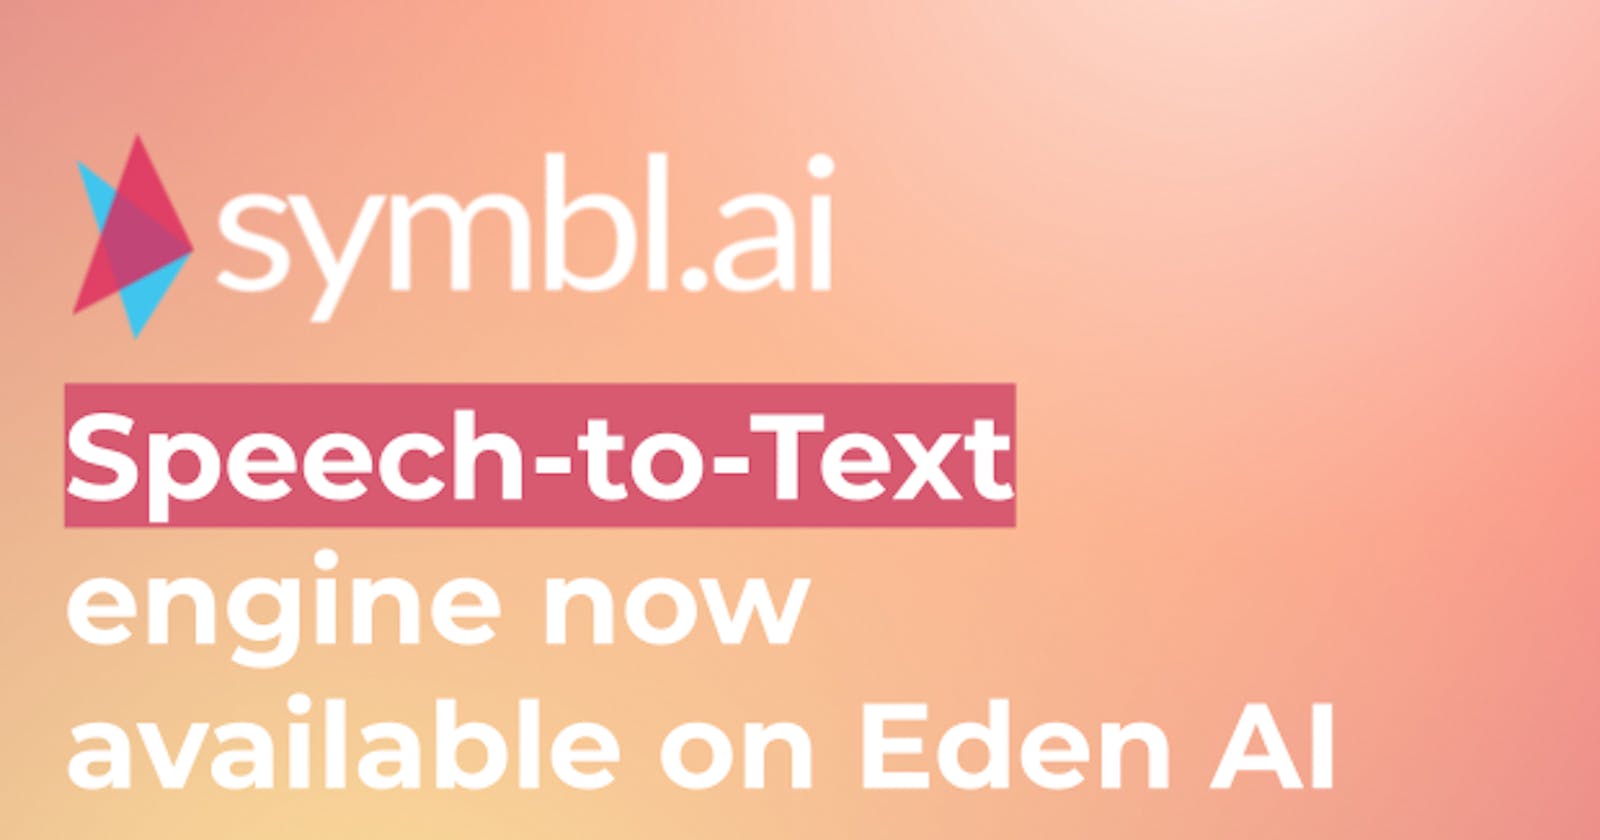 Symbl.ai Speech-to-Text engine is available on Eden AI